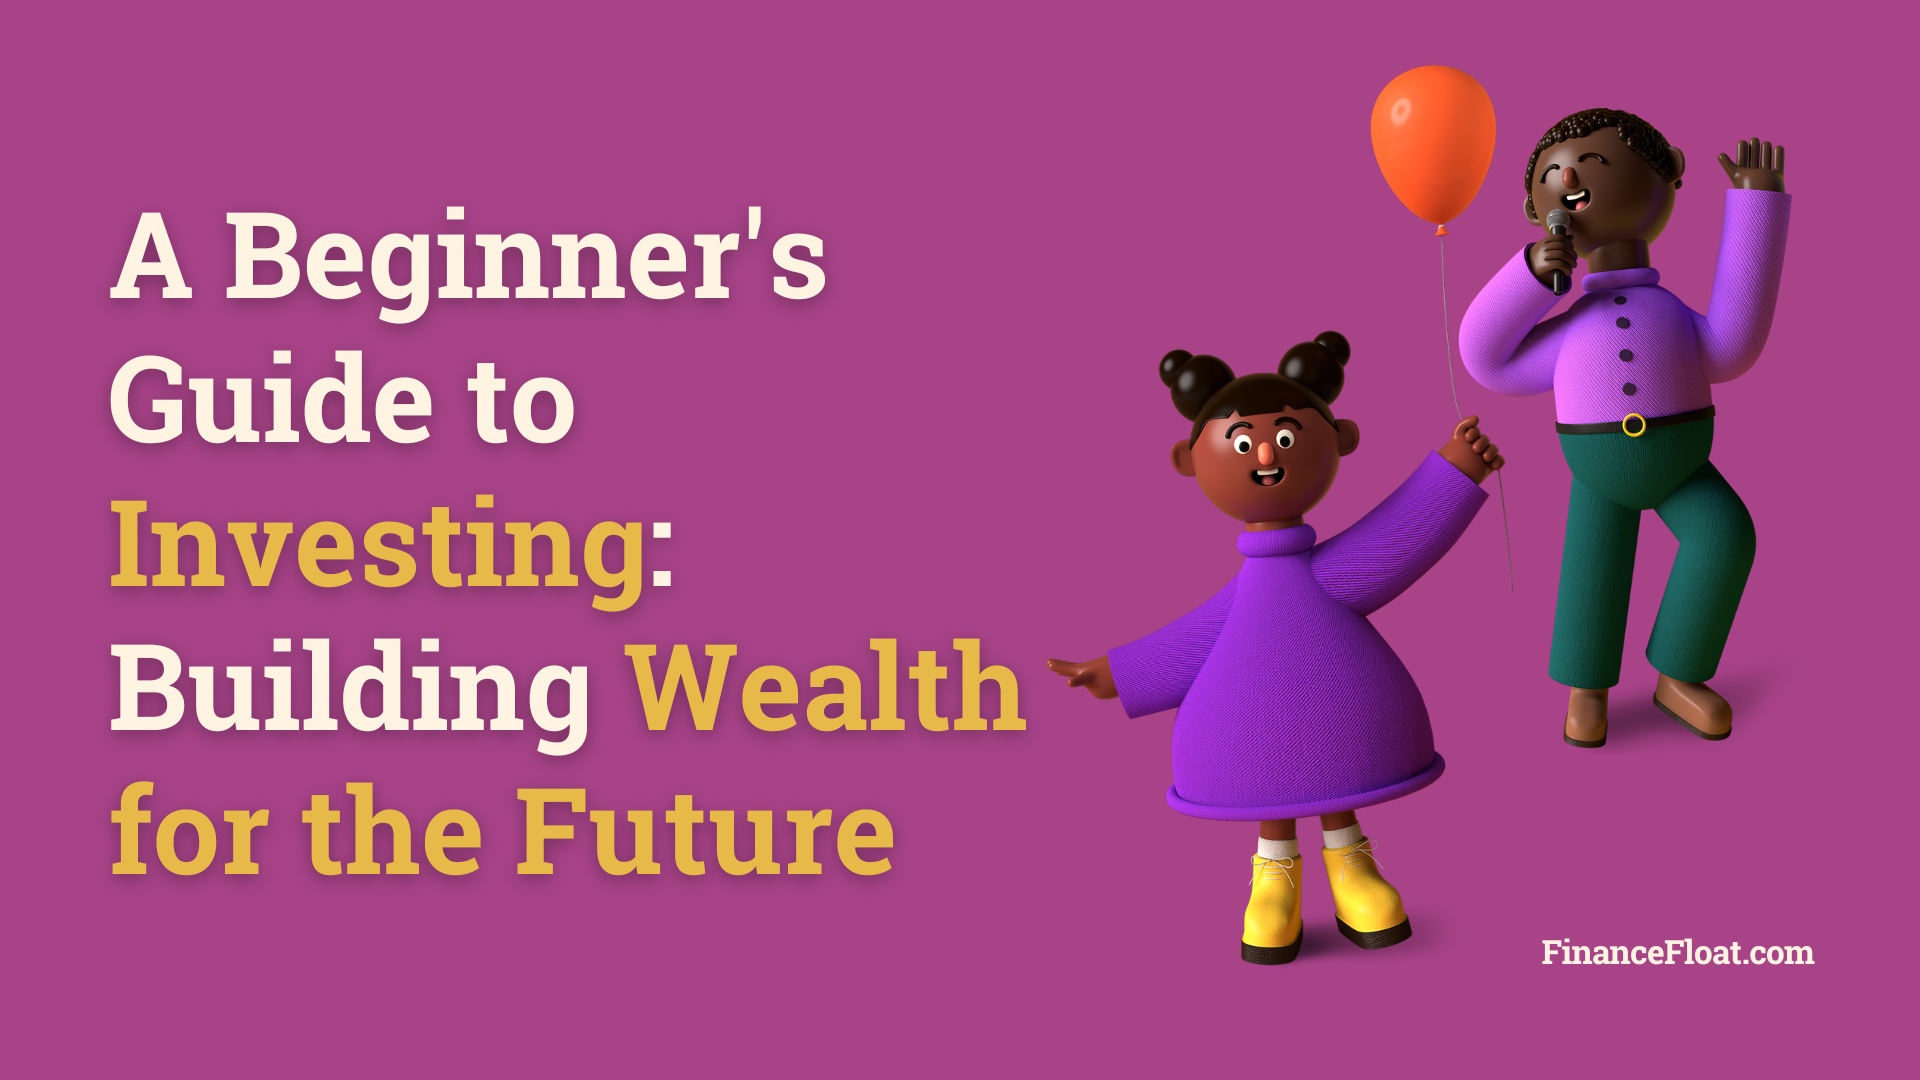 A Beginner's Guide to Investing: Building Wealth for the Future